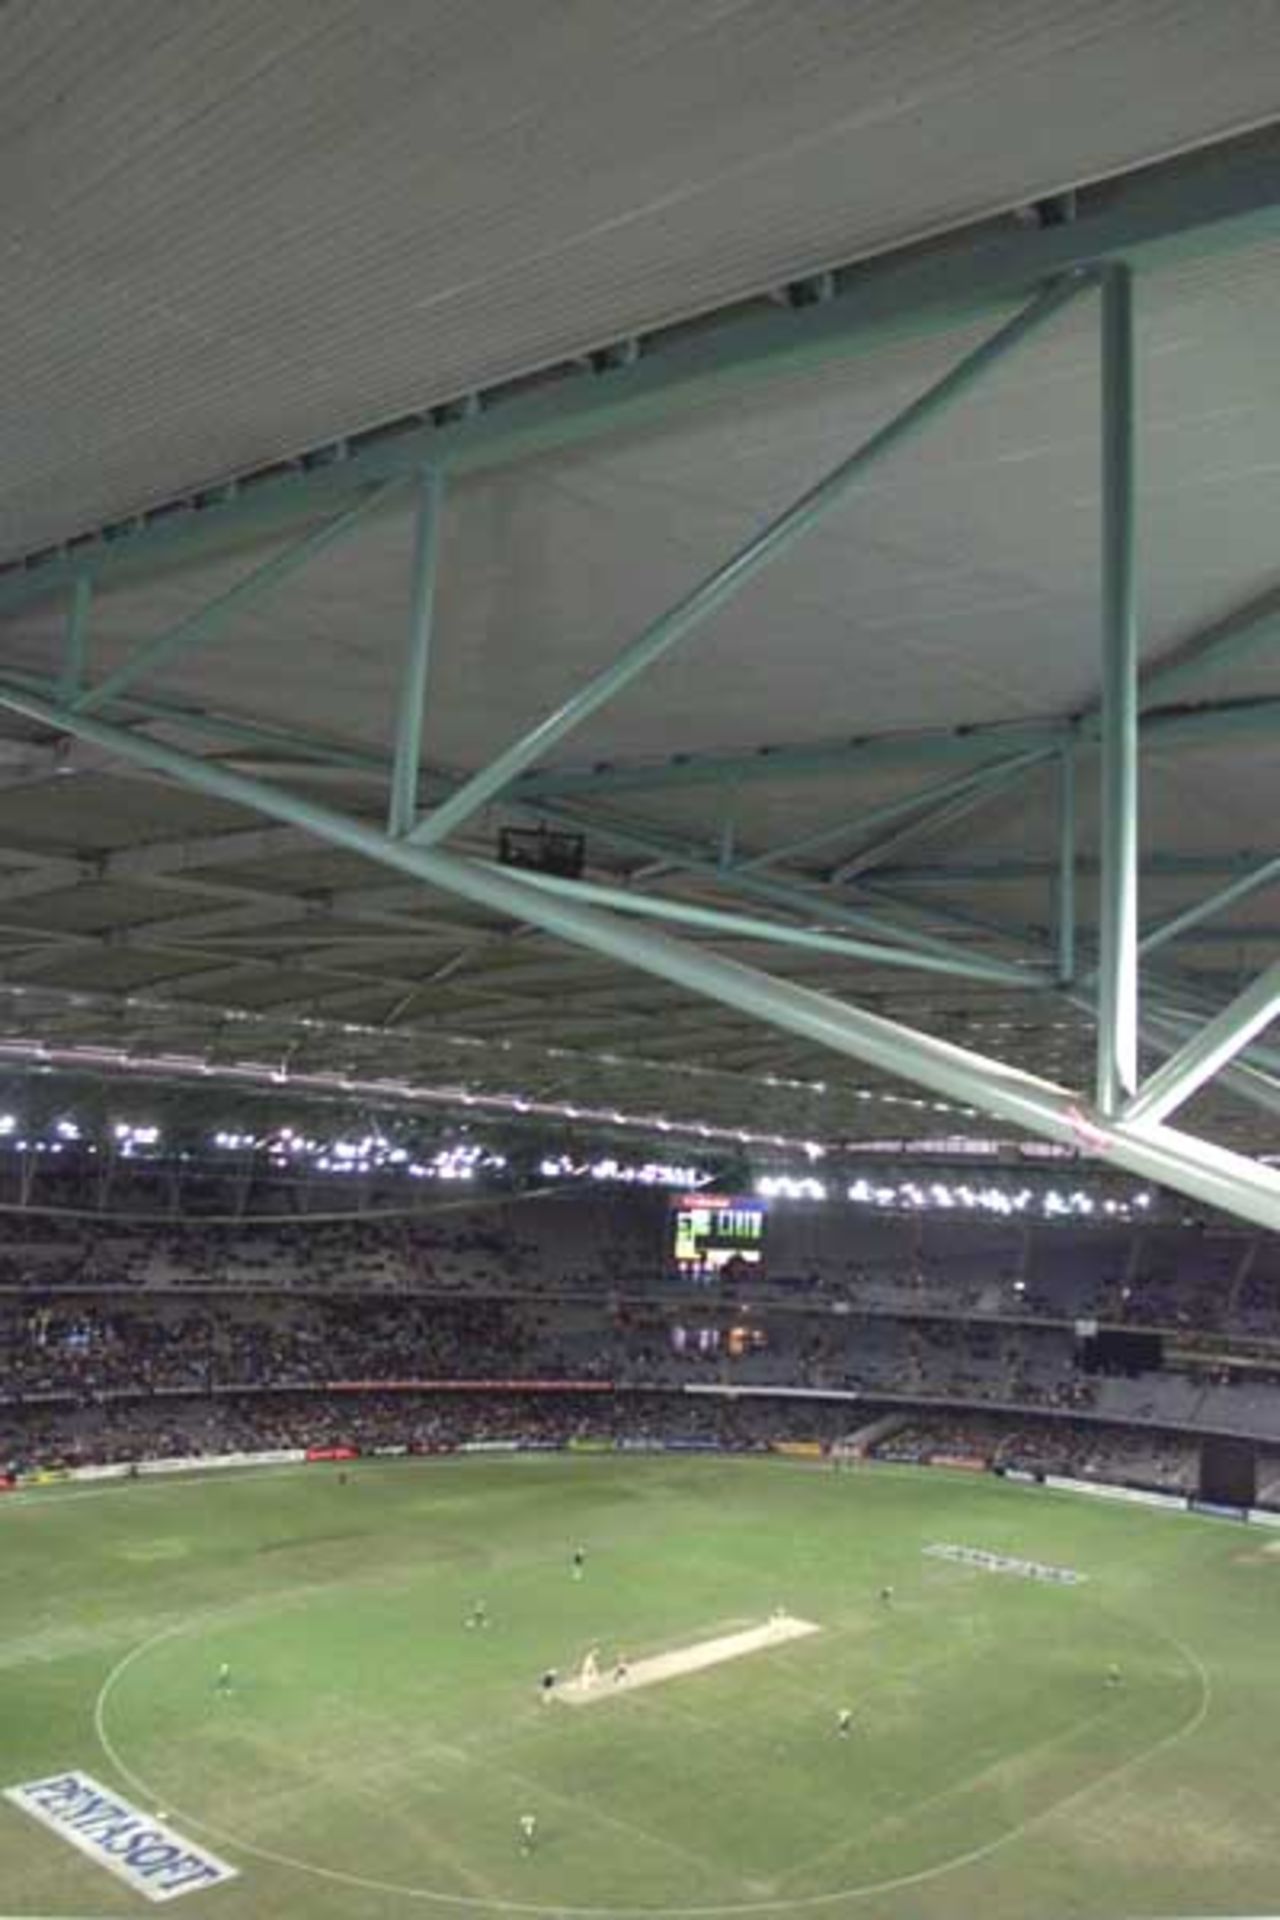 16 Aug 2000: General scenes from the roof in the match between Australia and South Africa, in game one of the Super Challenge 2000, played at Colonial Stadium in Melbourne, Australia. This is the first game of cricket to be played indoors.